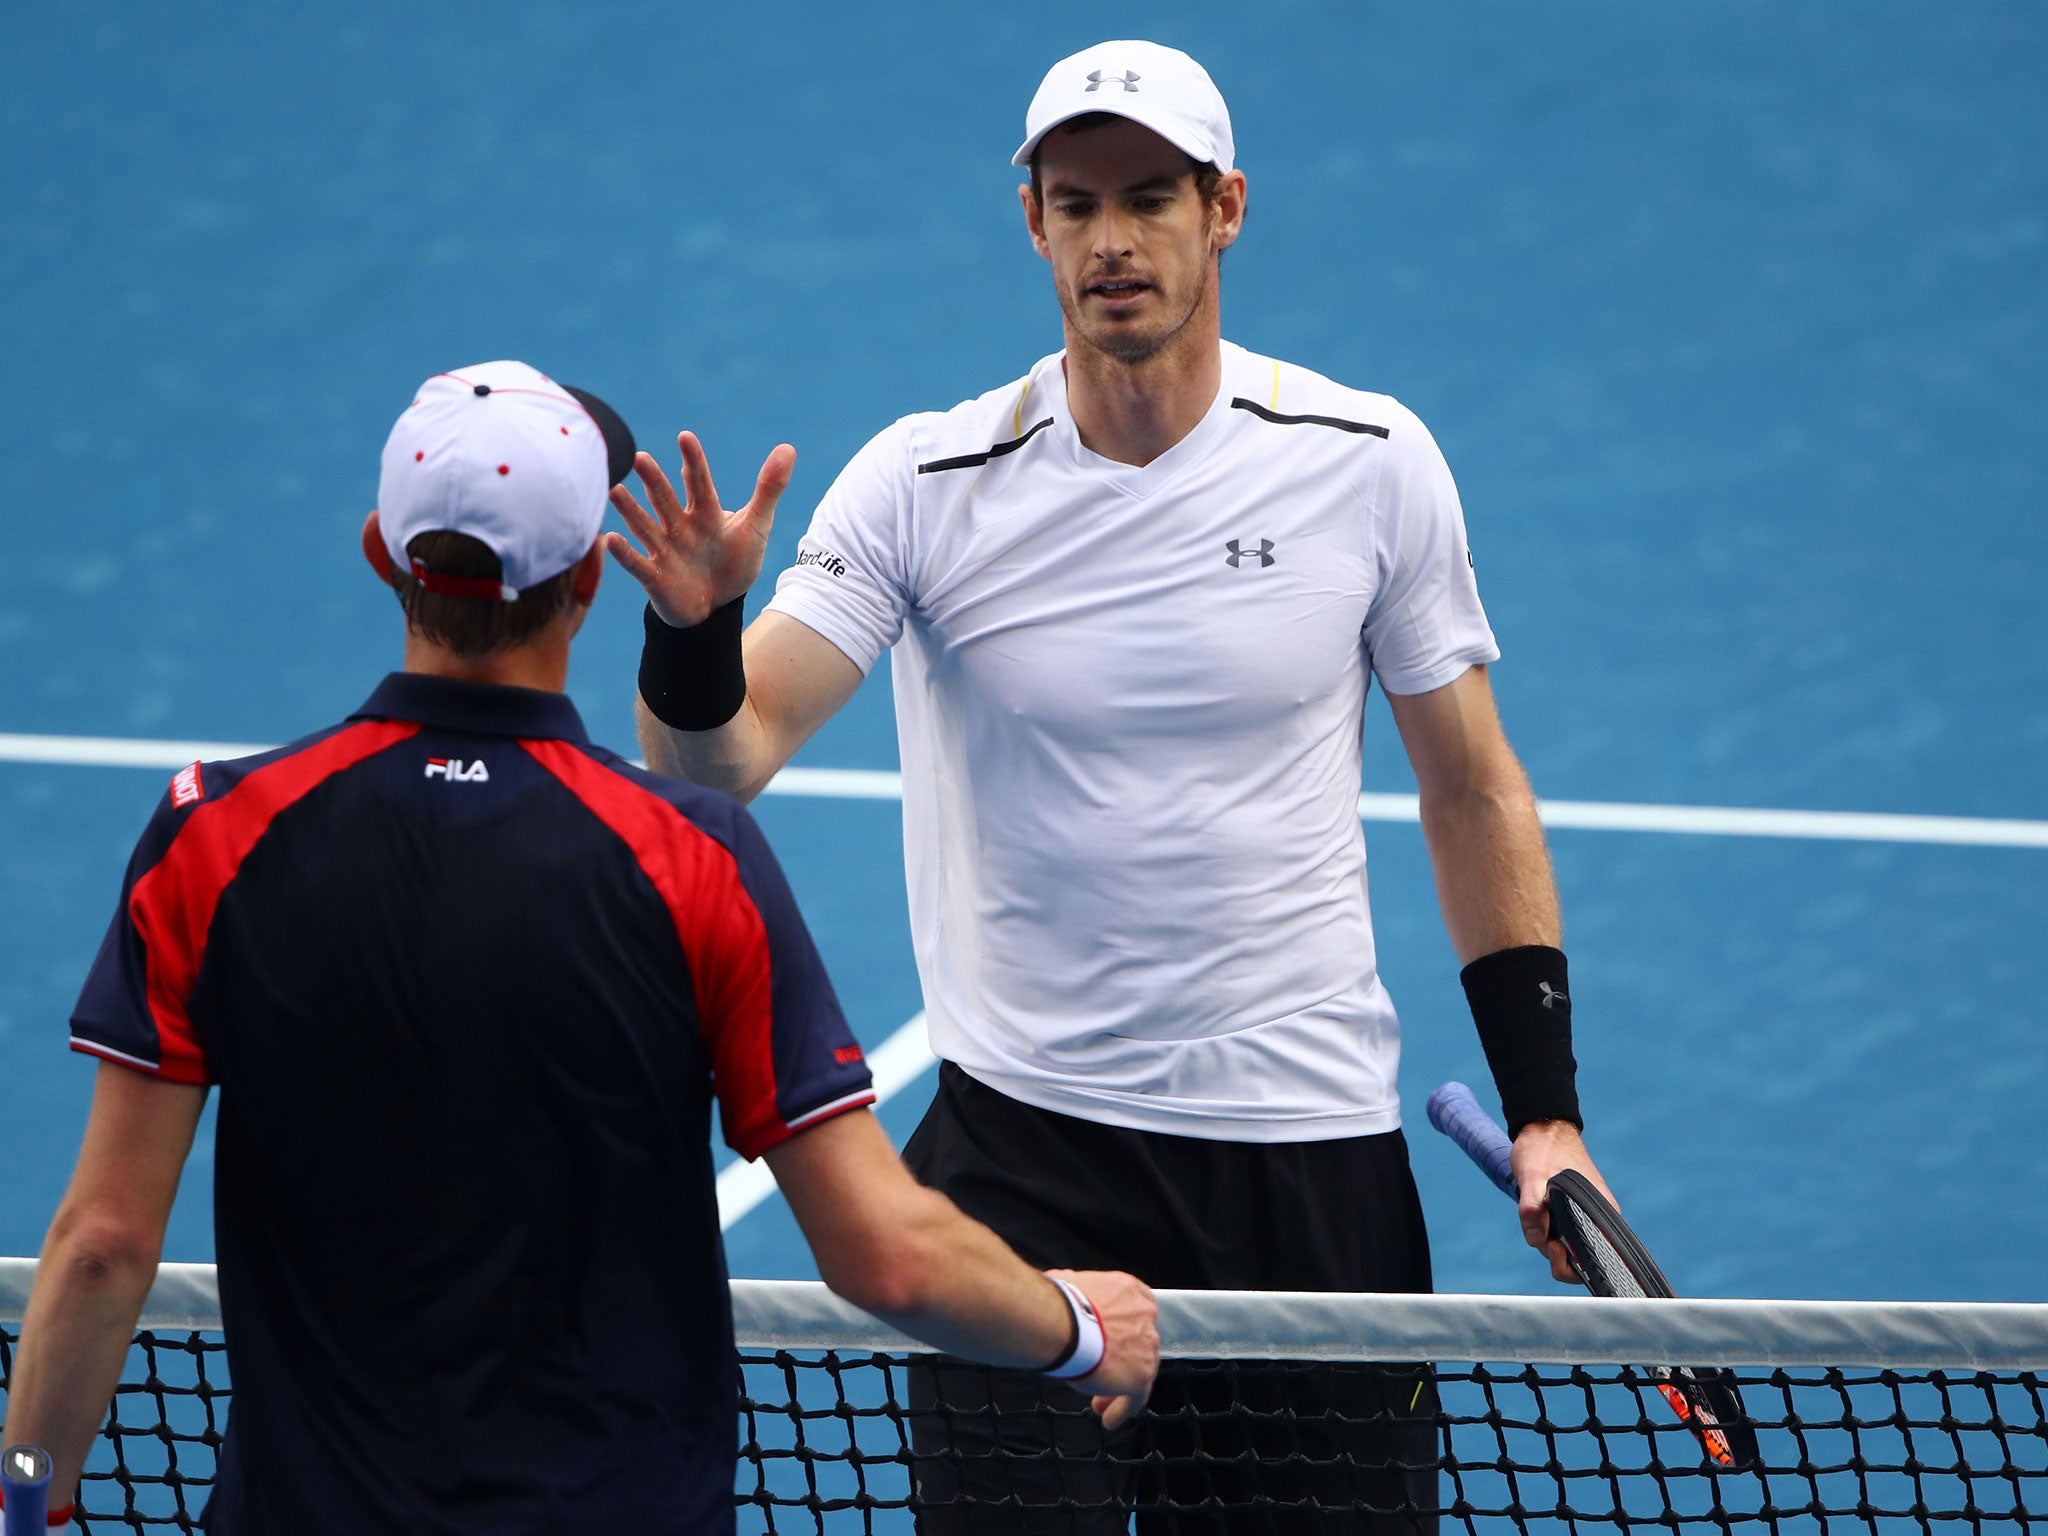 Murray shakes hands with Sam Querrey after their third round encounter